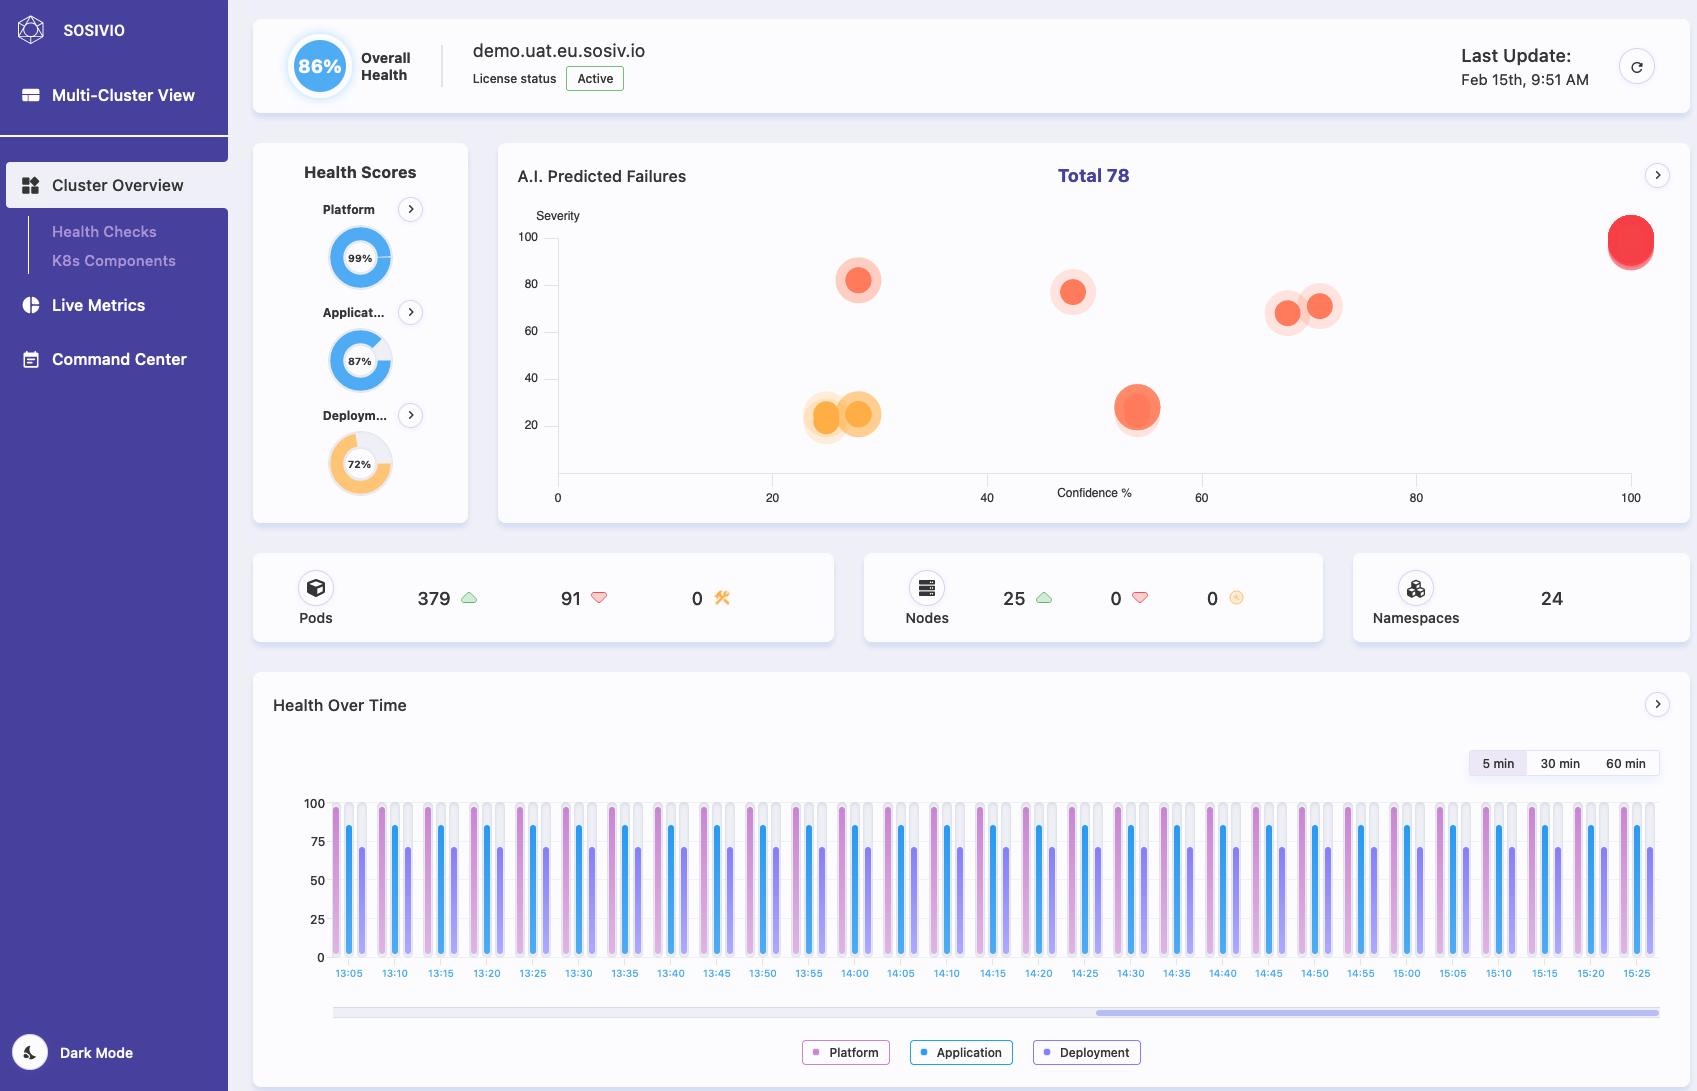 Cluster Overview - The Cluster Overview is your home page for the Sosivio Dashboard. rd. Here you get a high level overview of what is happening in your cluster including all active recommendations from the Sosivio Prediction Engine.